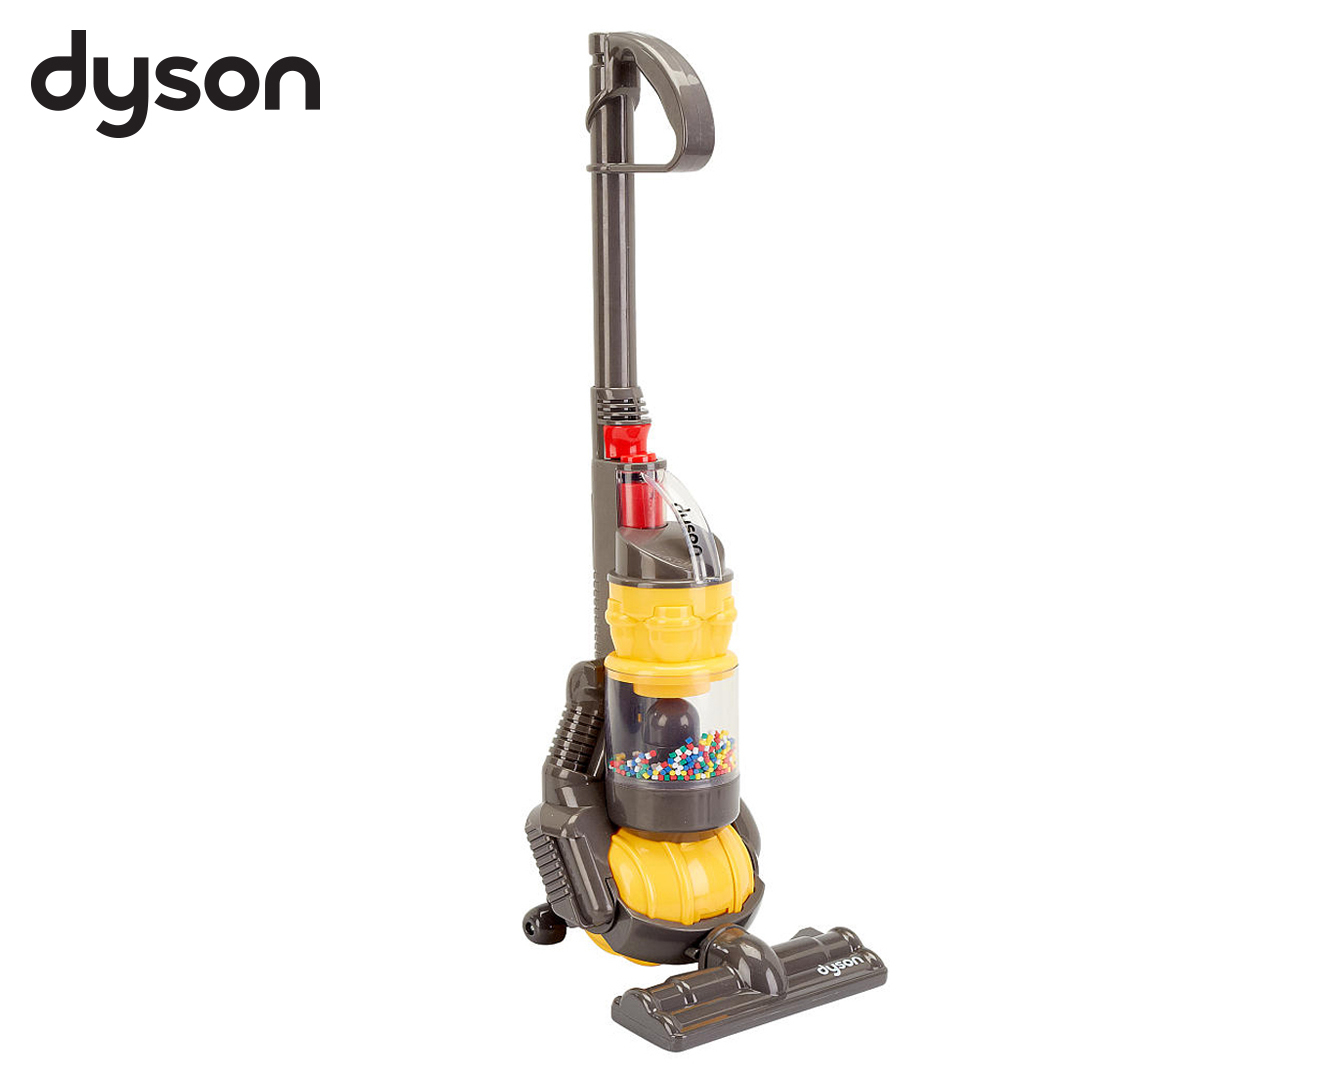 childs dyson vacuum cleaner